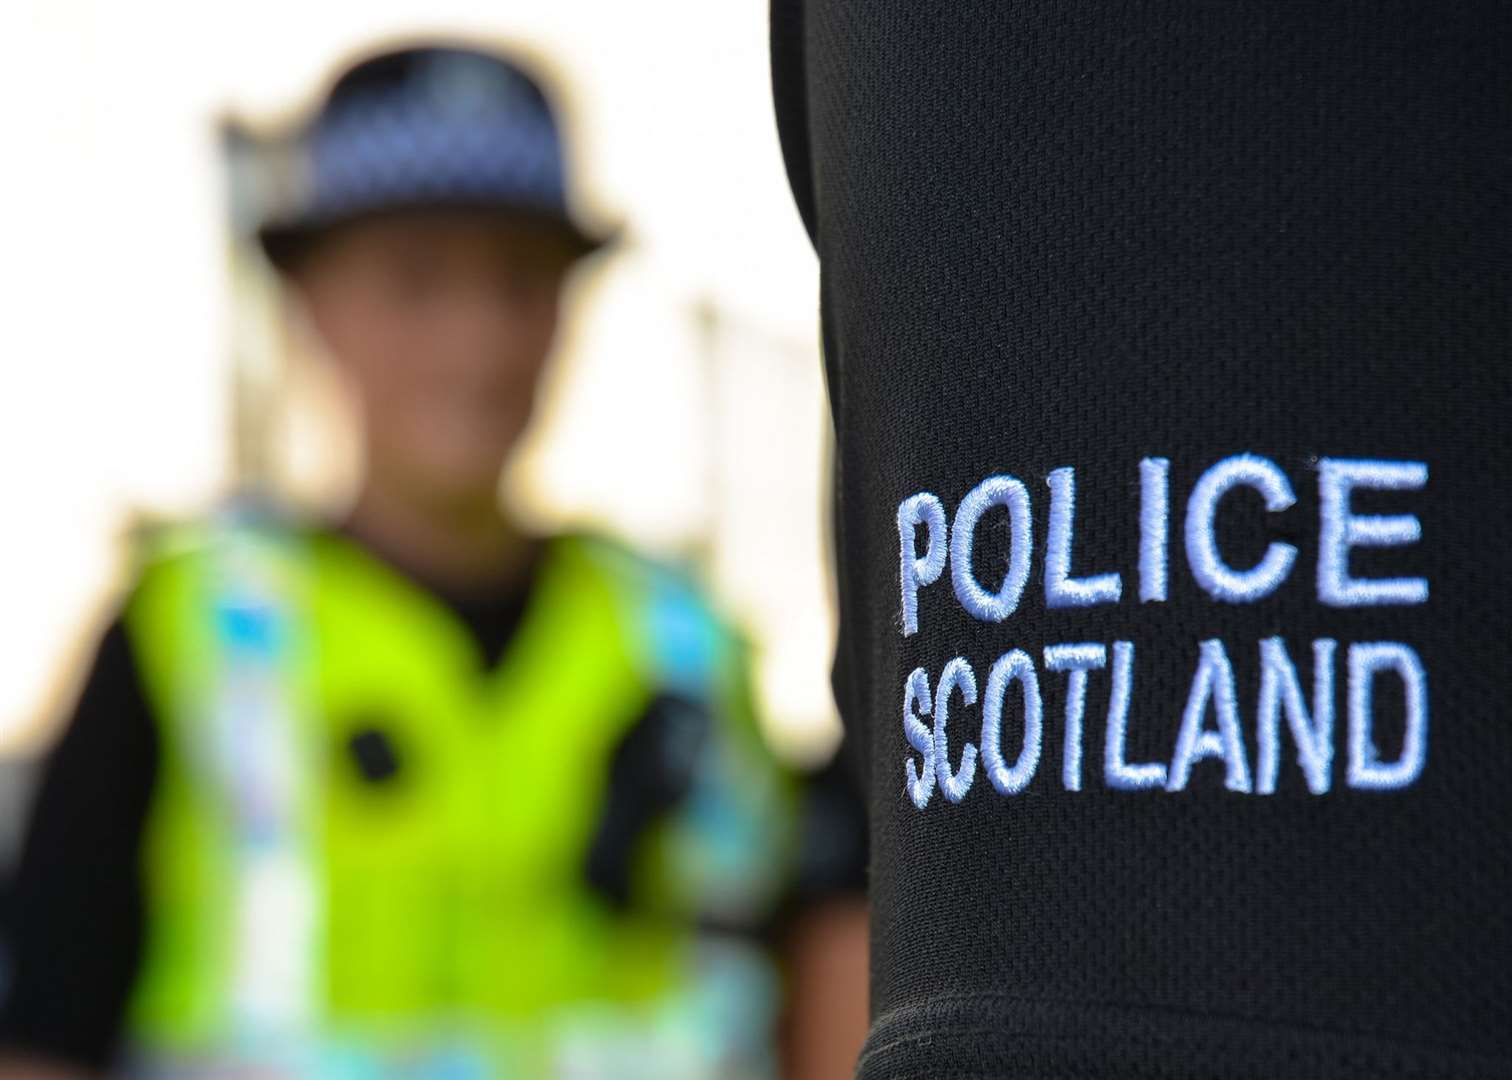 Aviemore police have issued an appeal for help